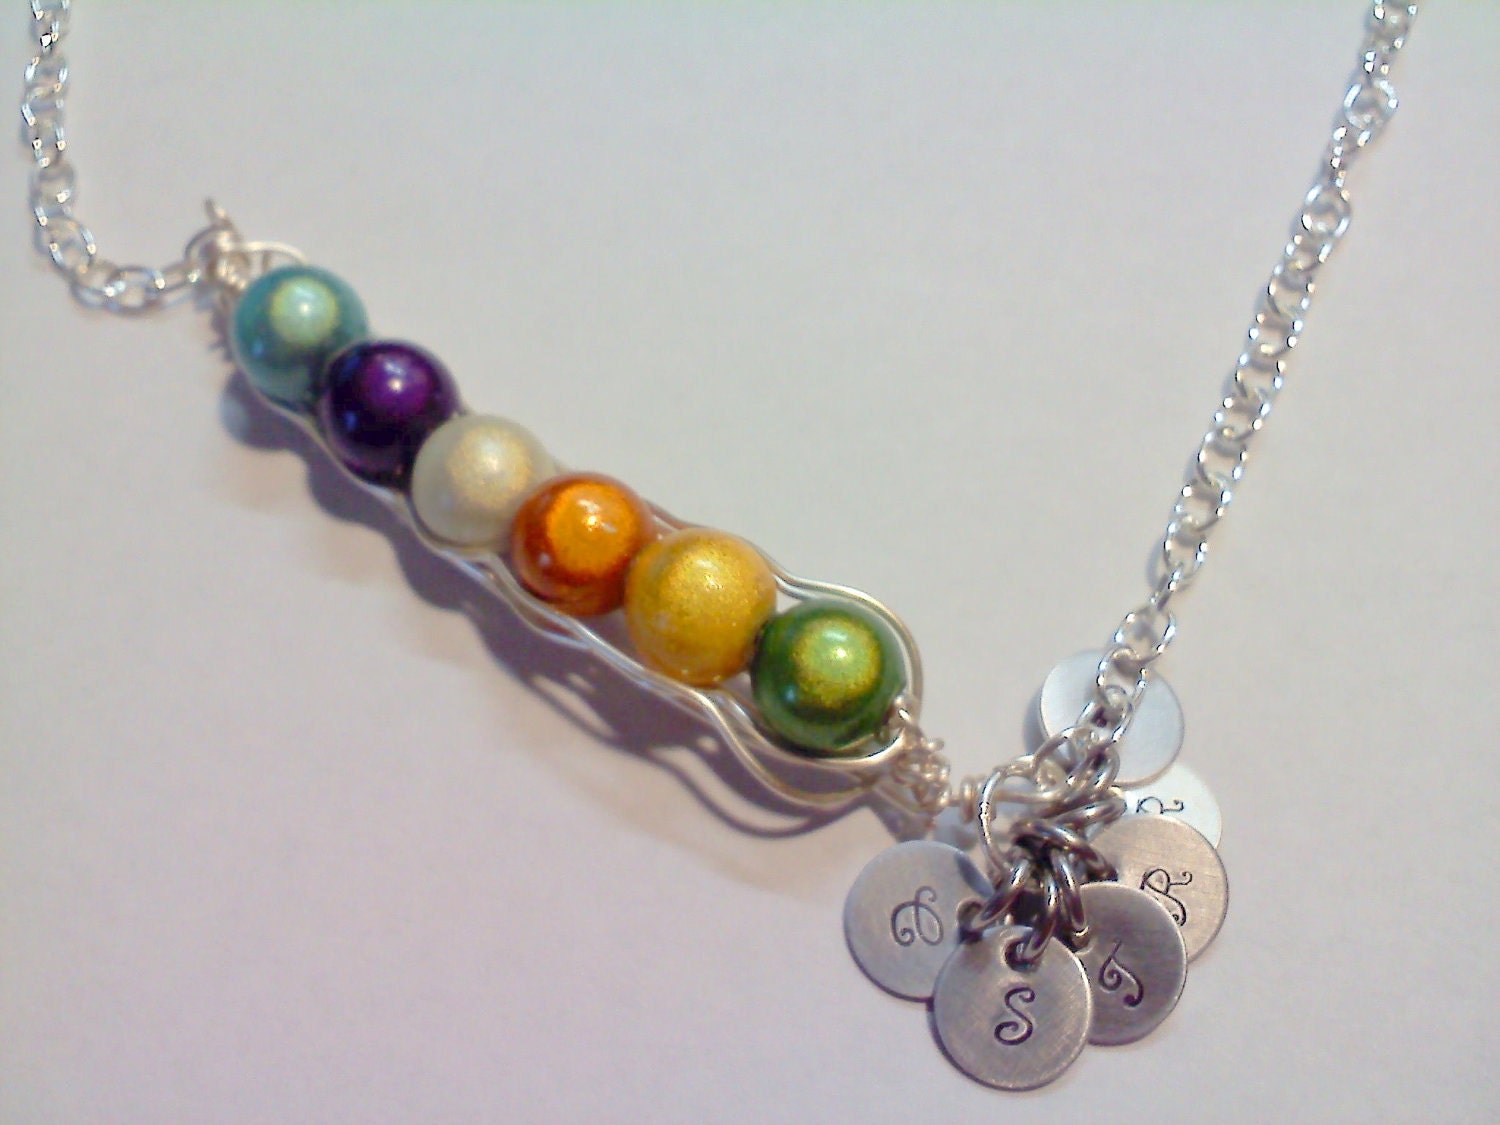 Peas in a Pod Necklace with Initials